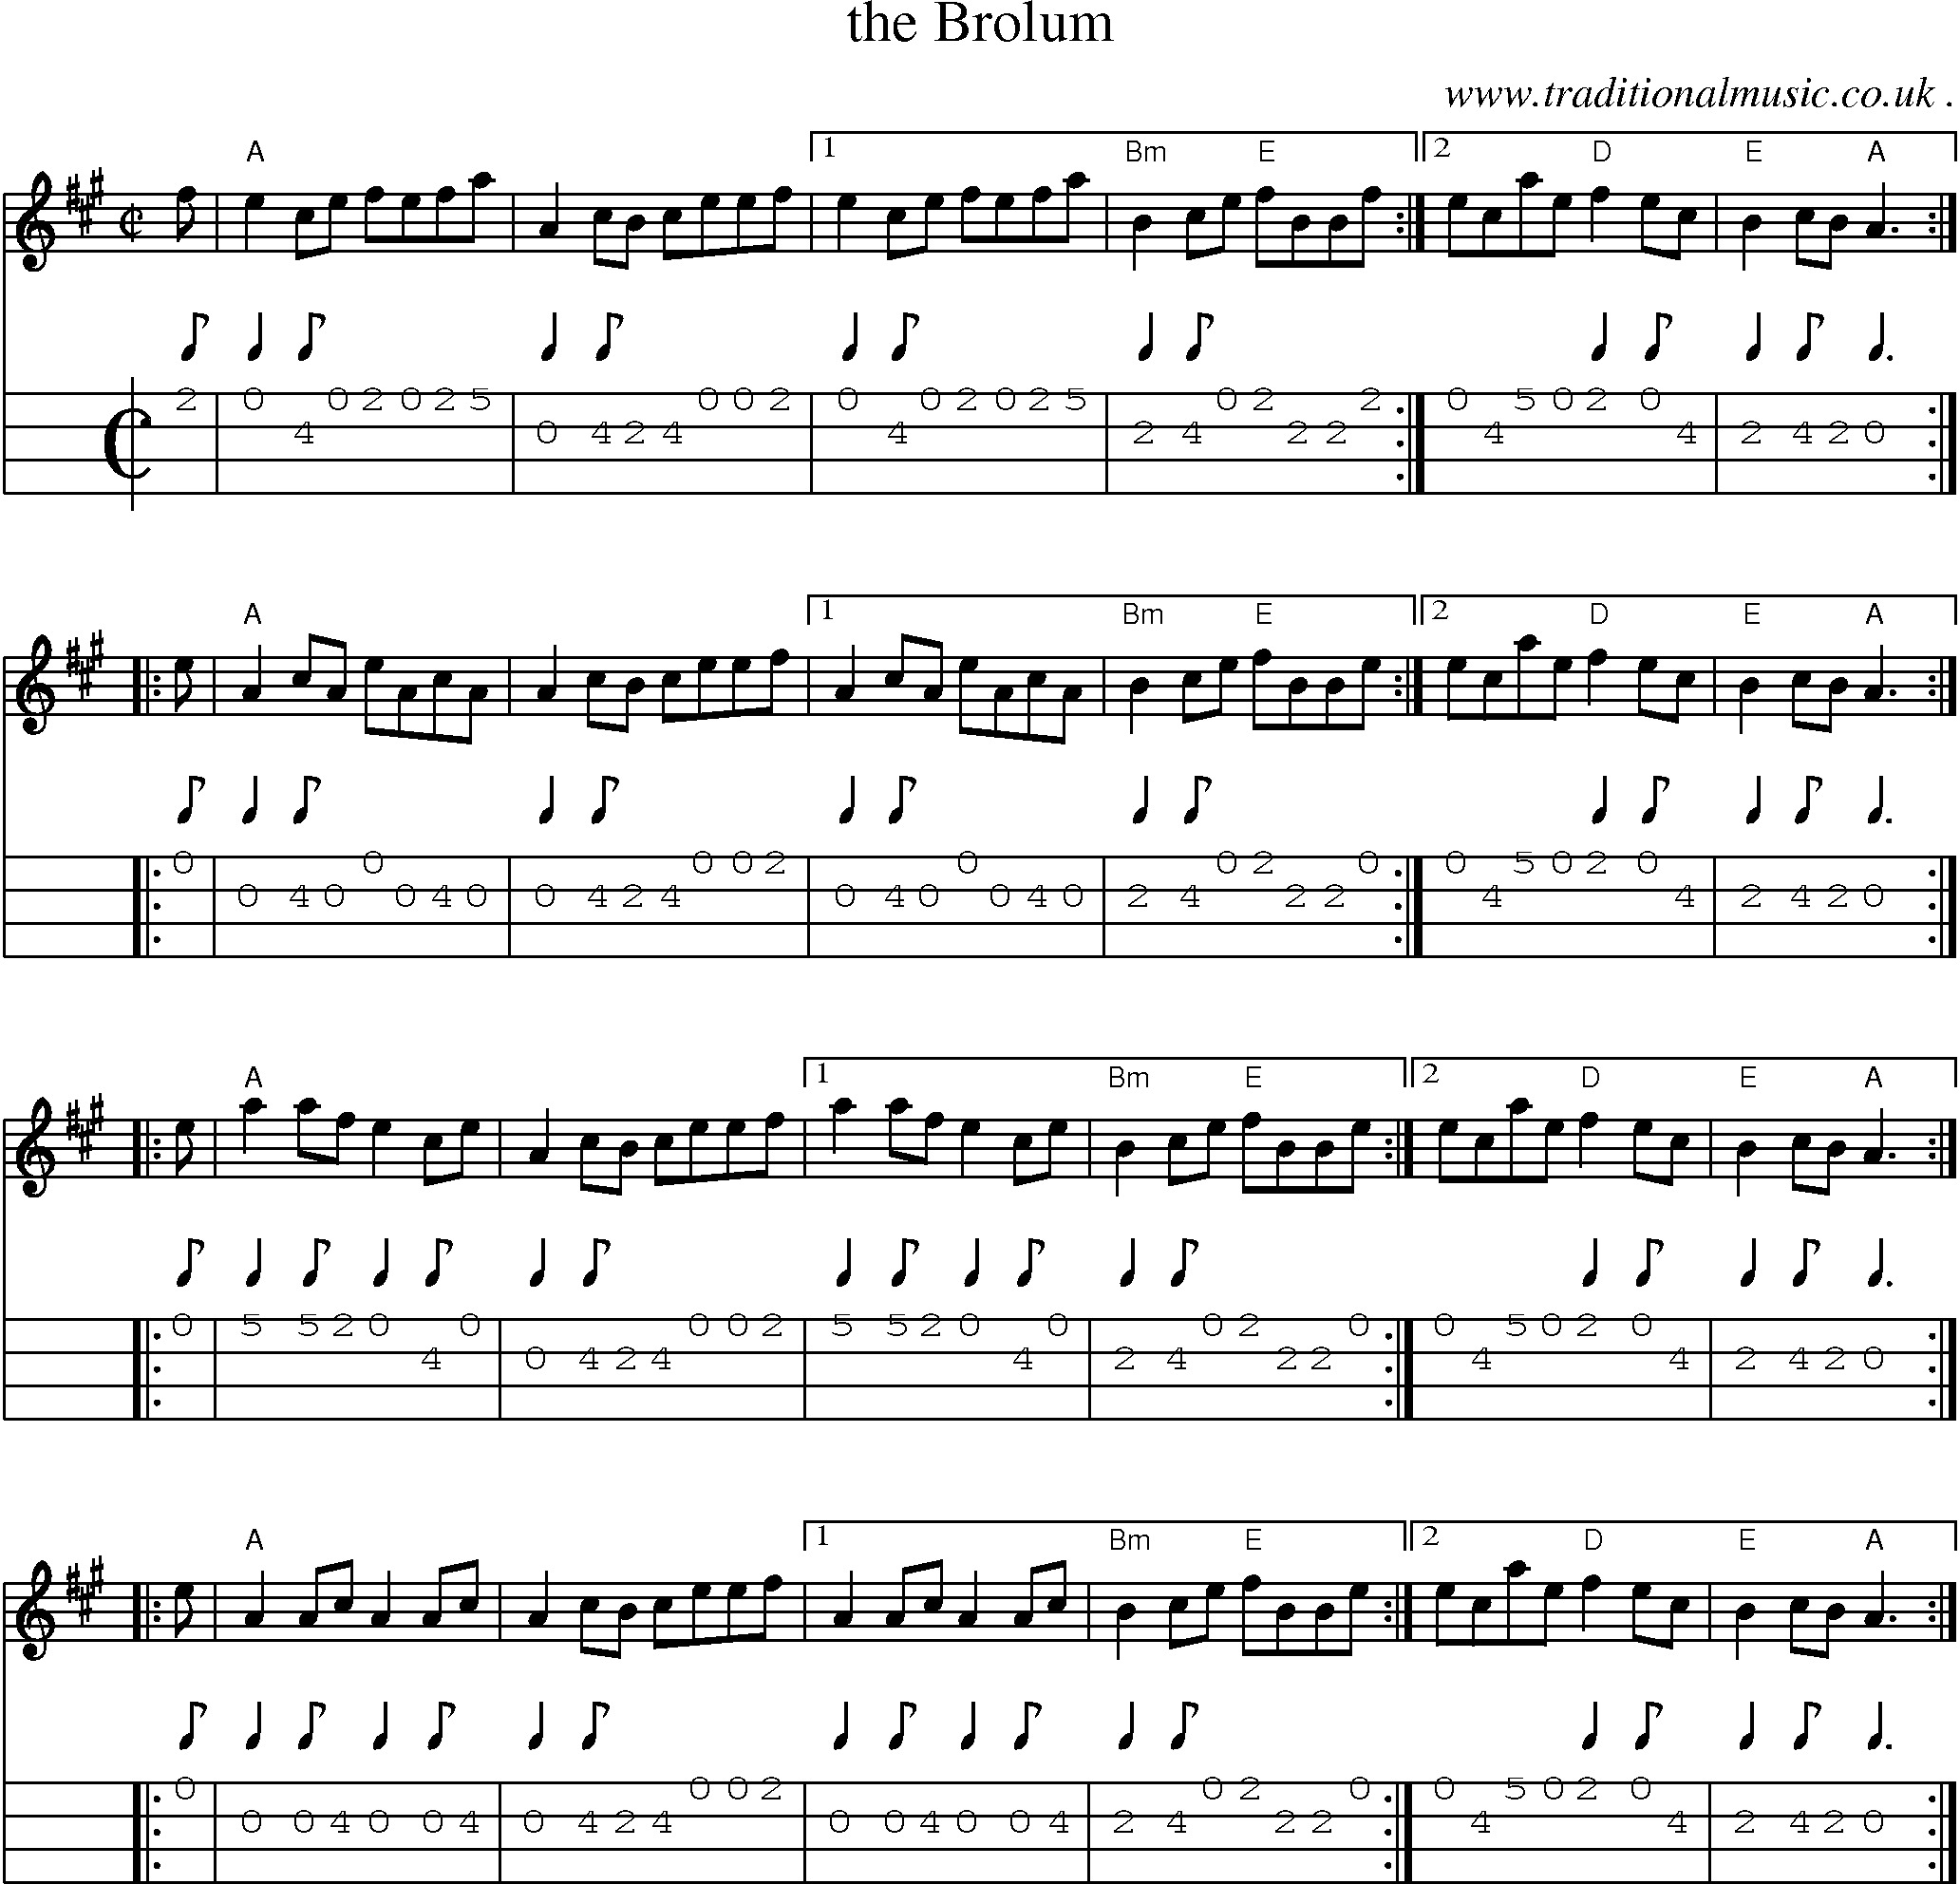 Sheet-music  score, Chords and Mandolin Tabs for The Brolum